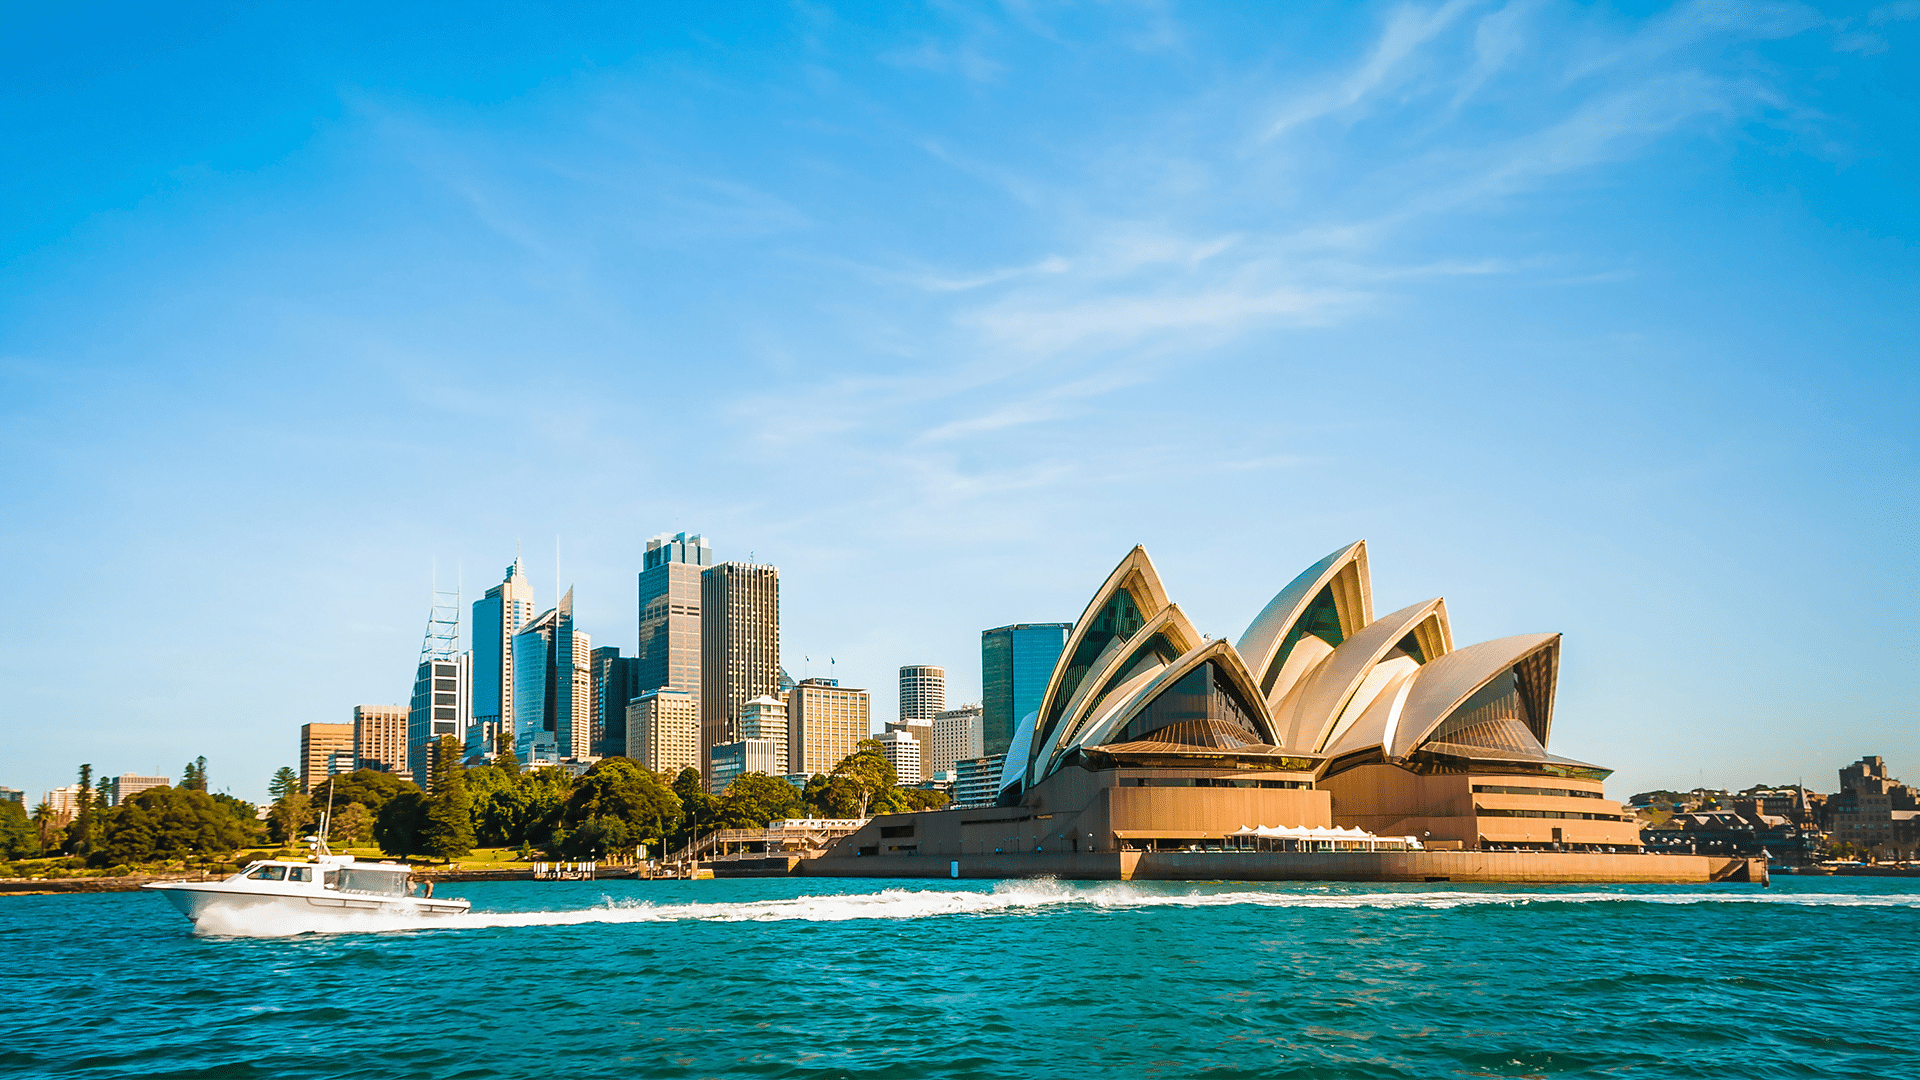 Image showing the Sydney Harbour